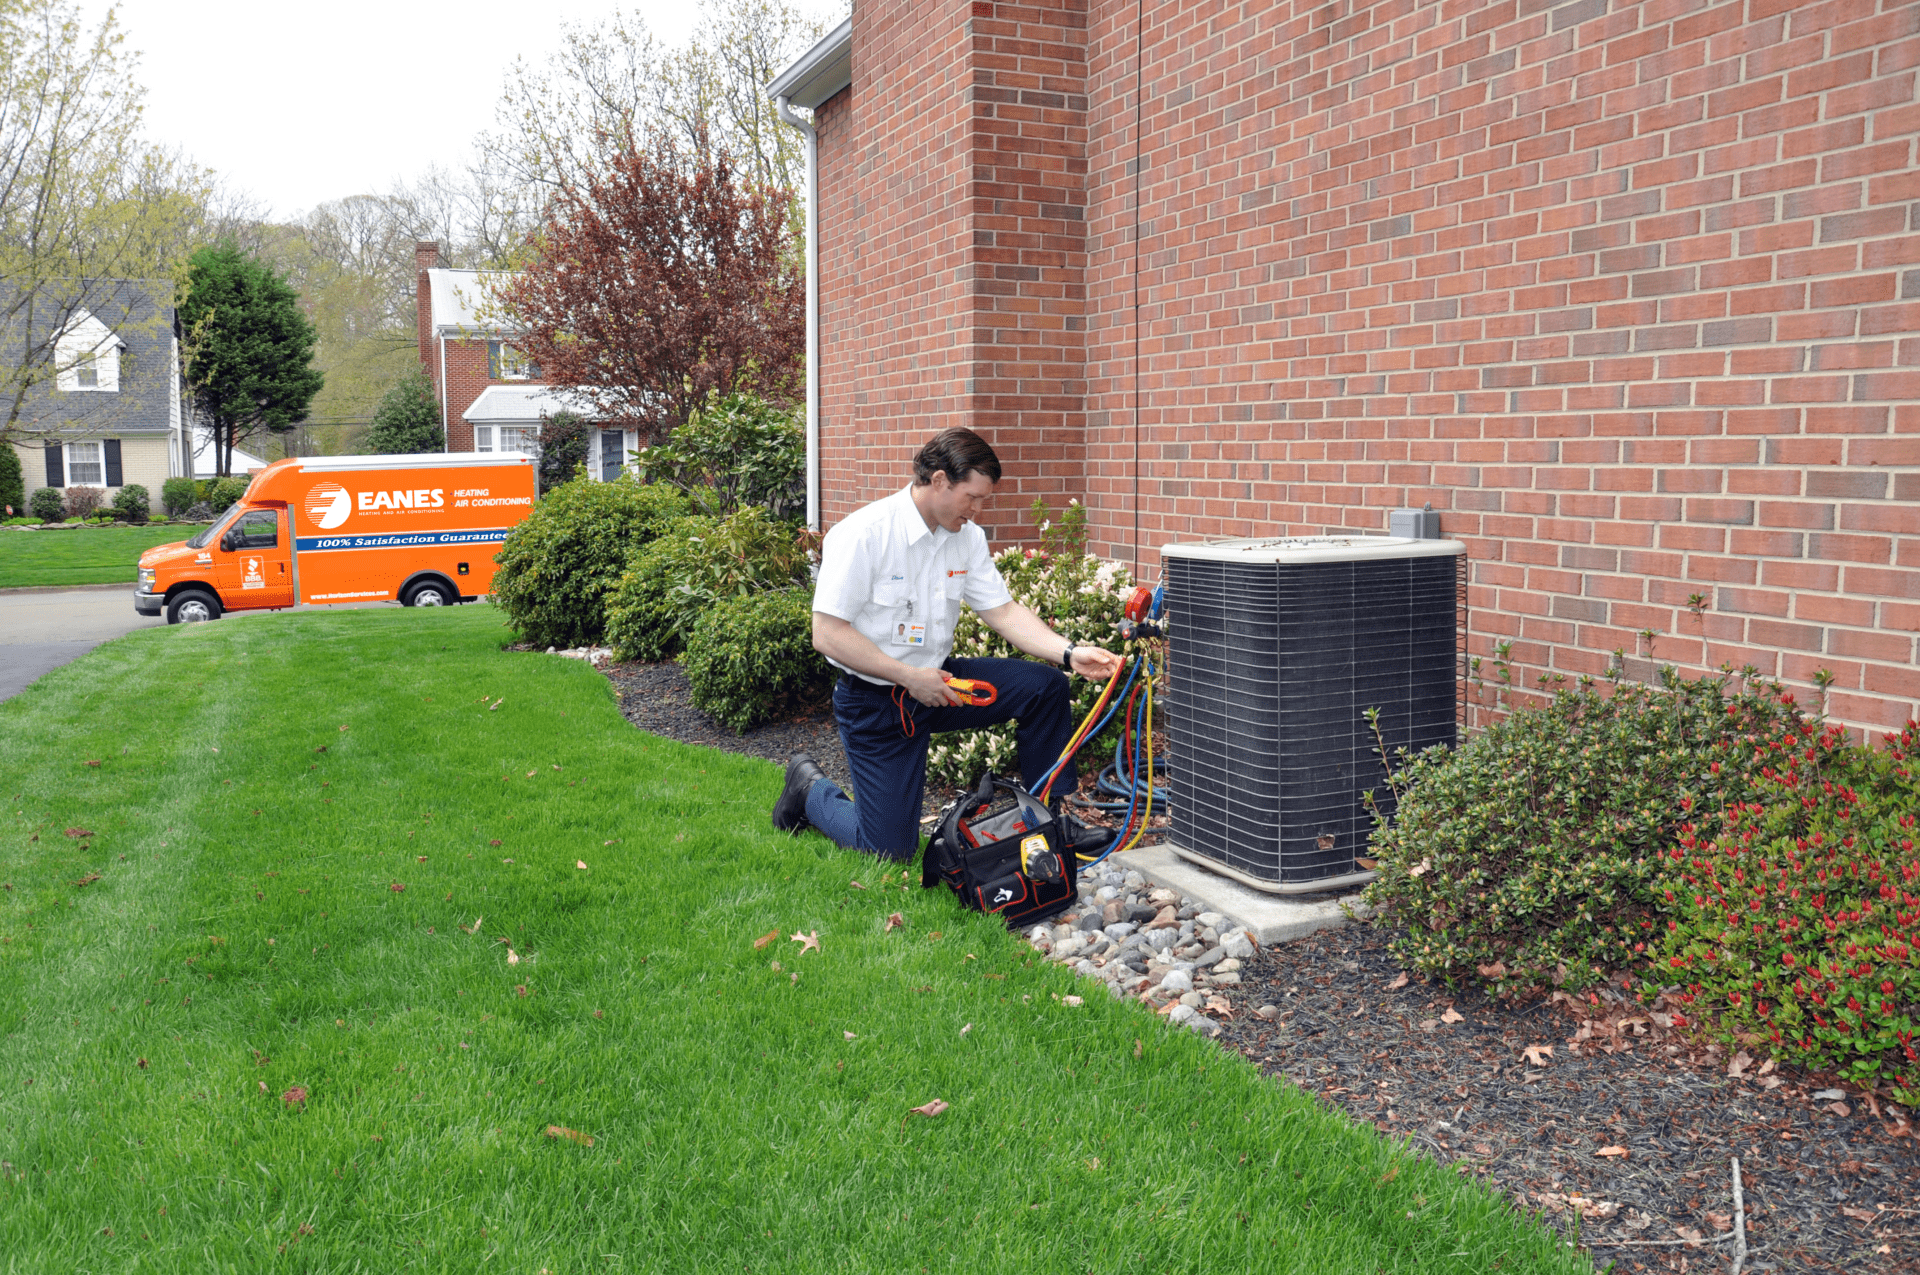 About |  Eanes Heating & Air